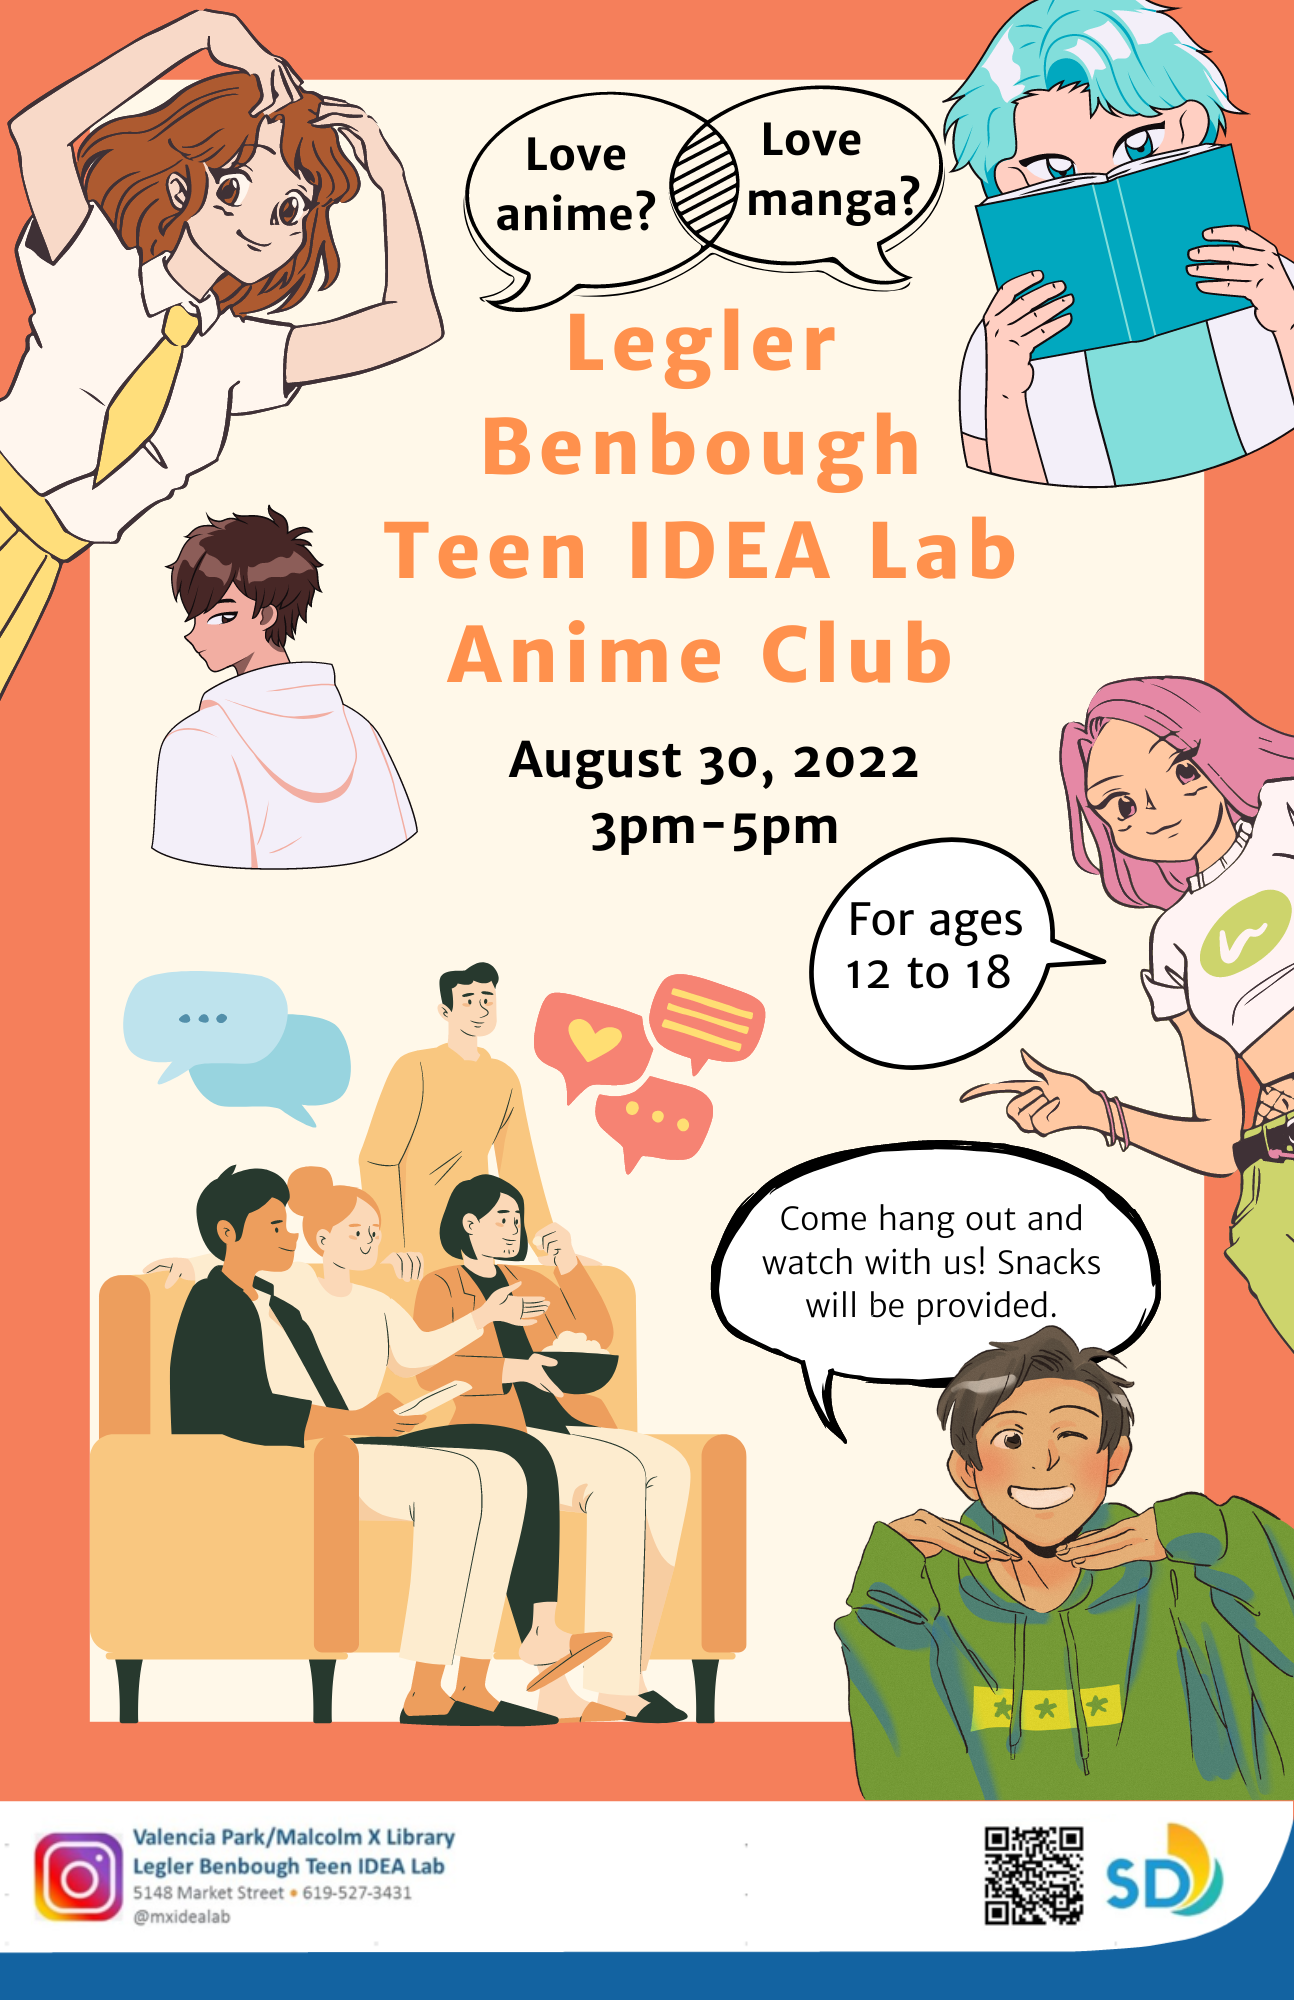 Orange background with images of various cartoon characters, along with an image of teens watching anime. Title text reads, "Legler Benbough Teen IDEA Lab Anime Club." Speech bubbles read, "Love anime? Love Manga?" and "For ages 12-18" and "Come hang out and watch with us! Snacks will be provided."